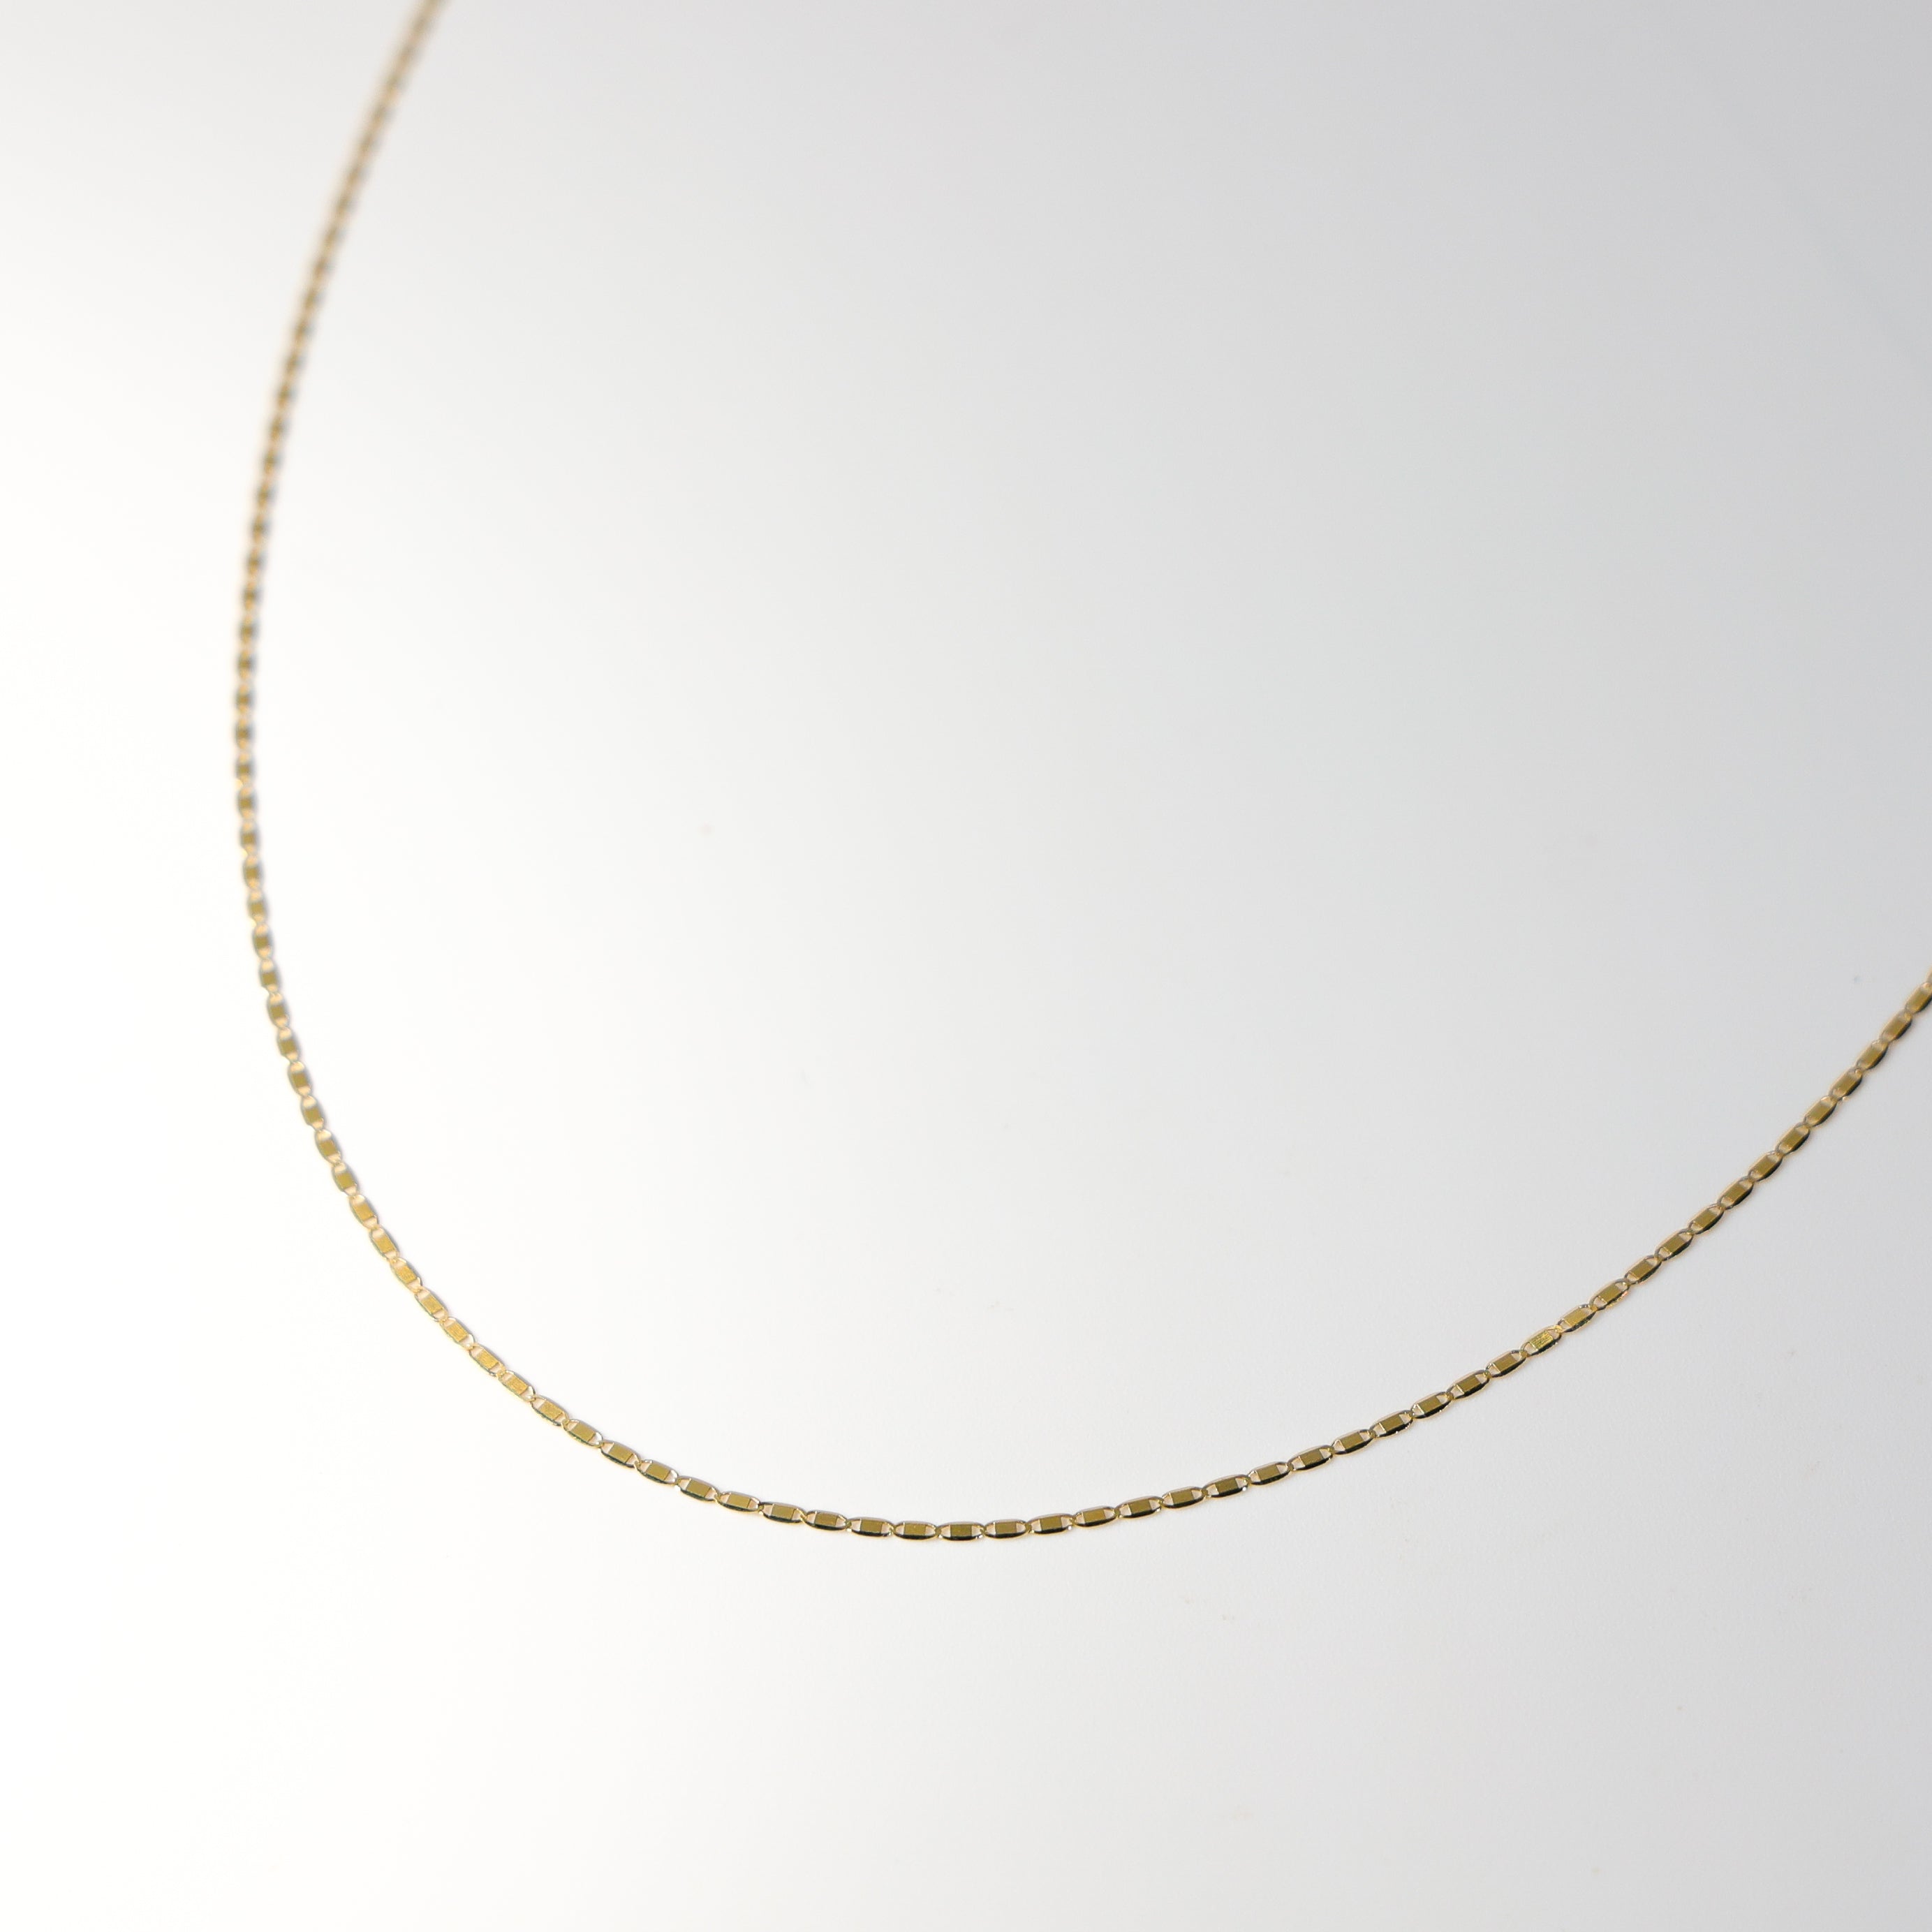 1.3mm Solid 14K Gold Valentino Chain Model-0266 - Charlie & Co. Jewelry